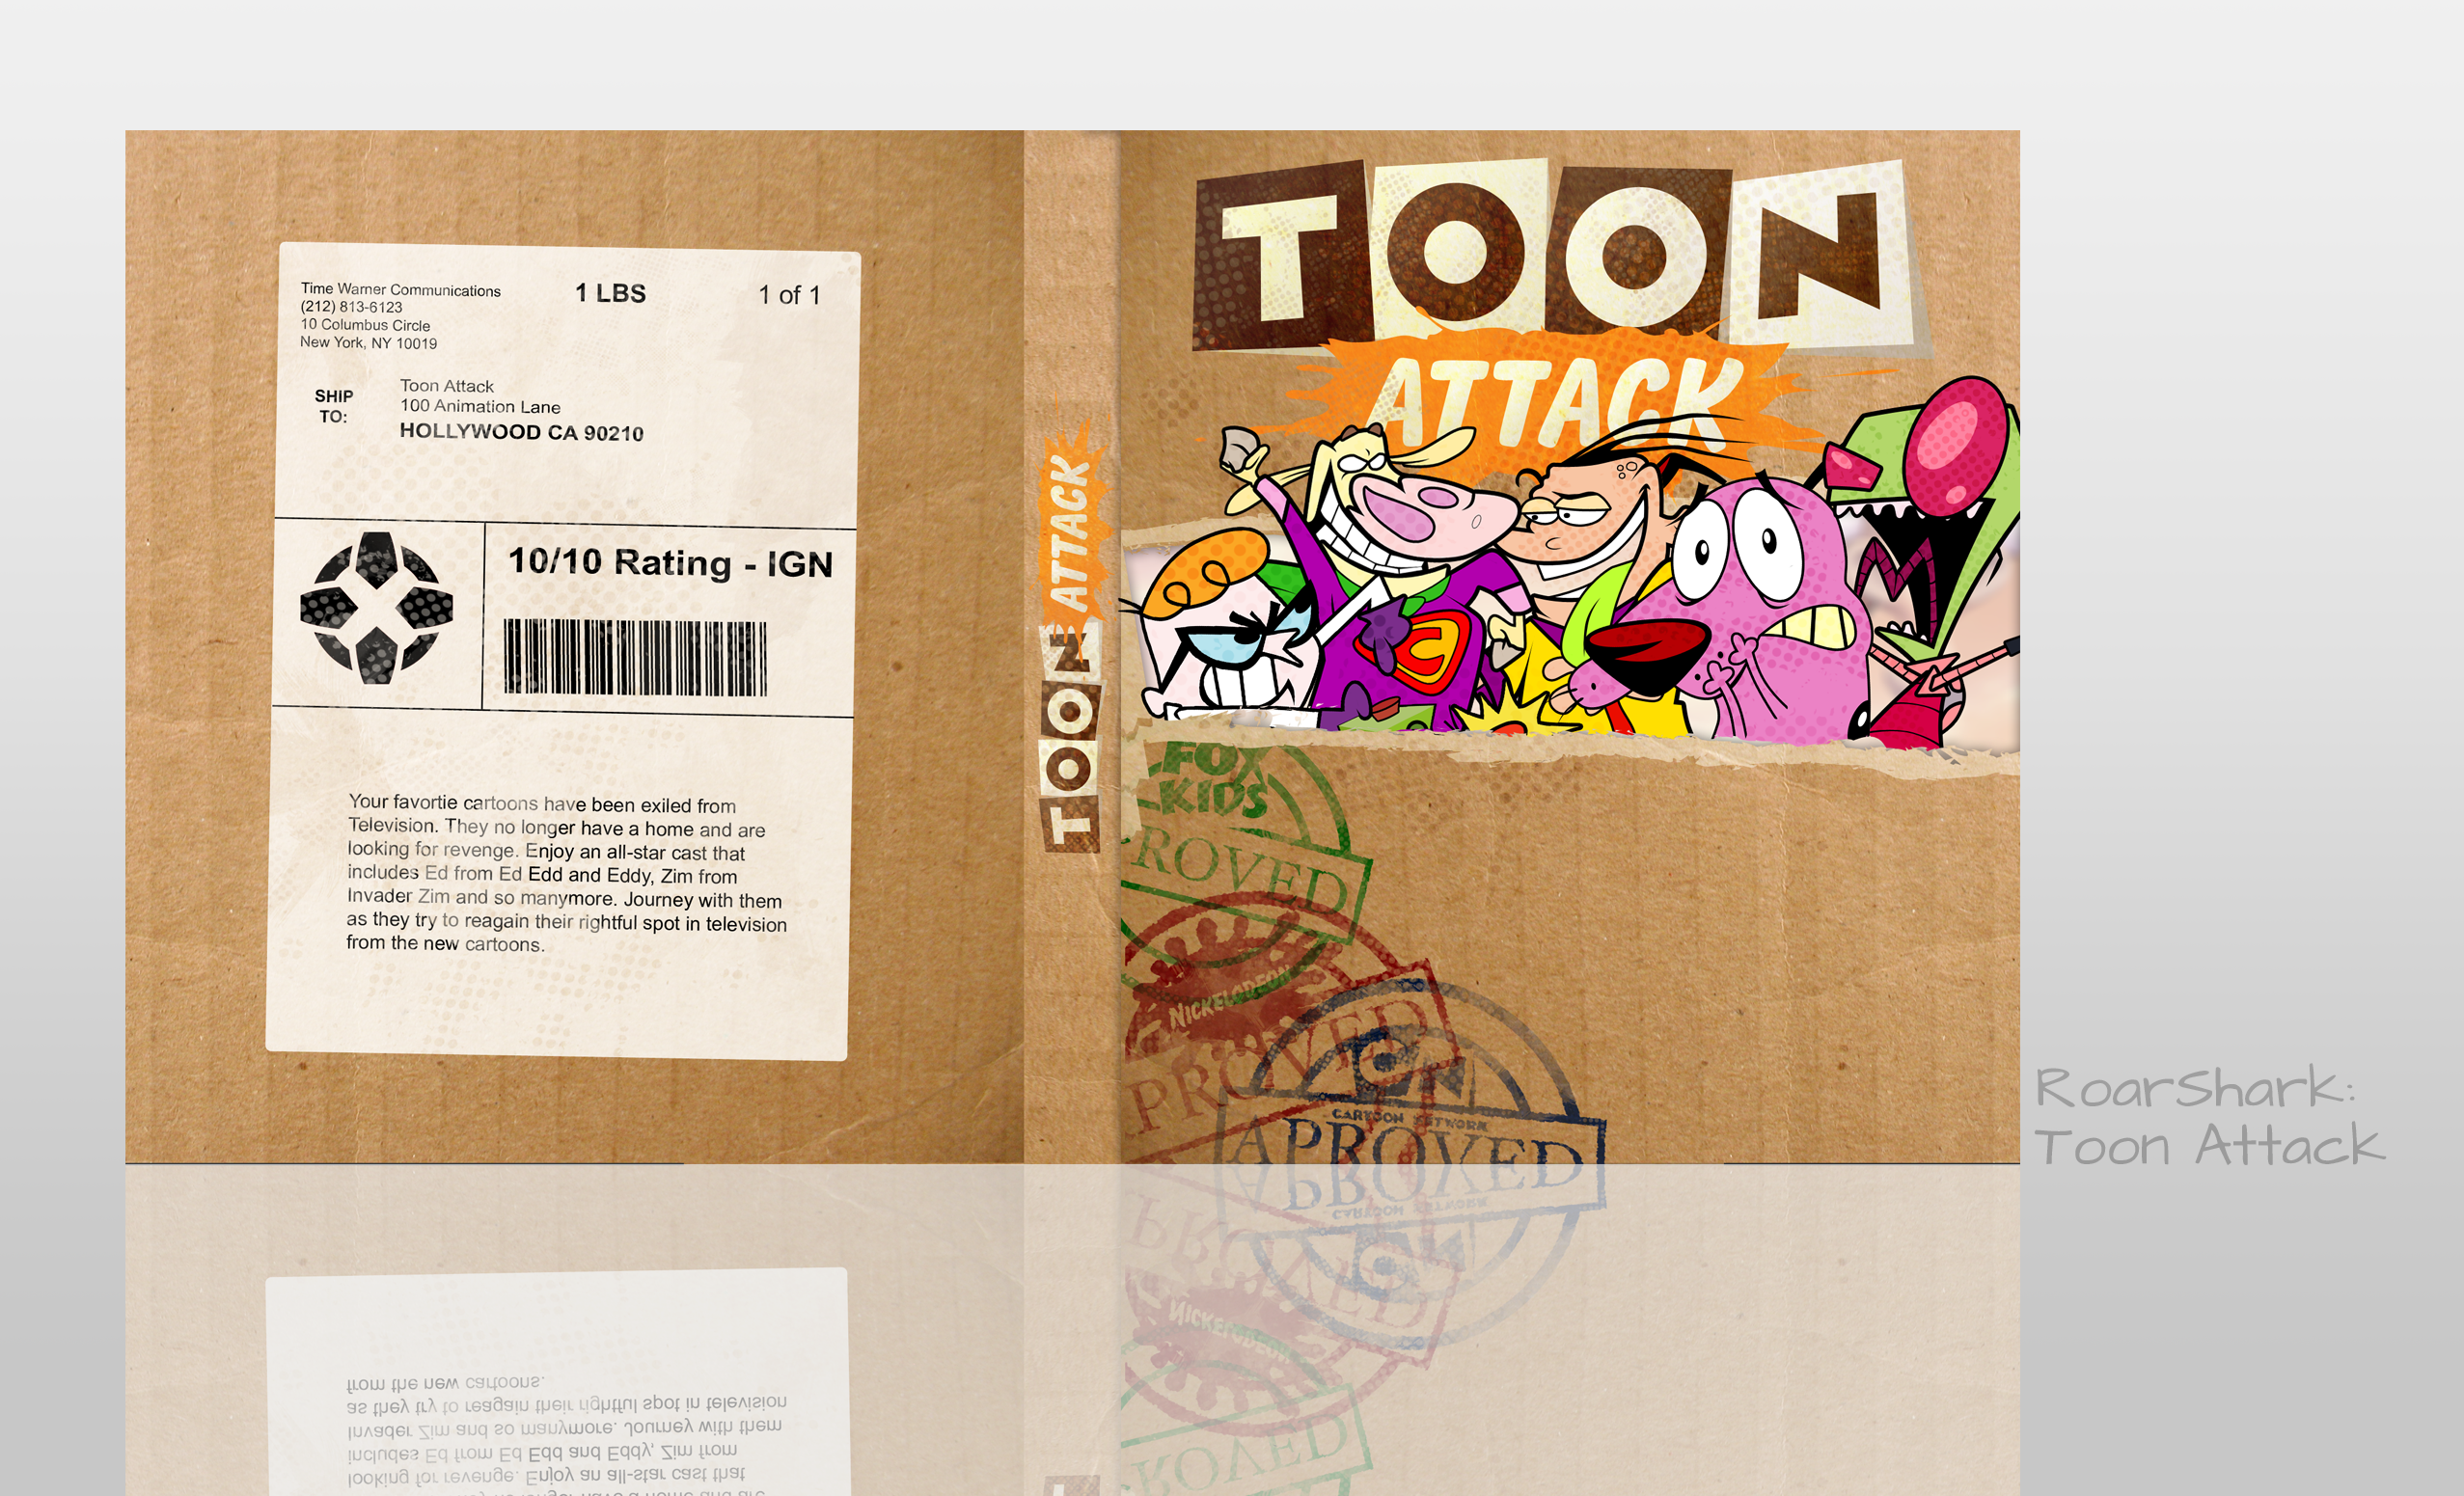 Toon Attack box cover